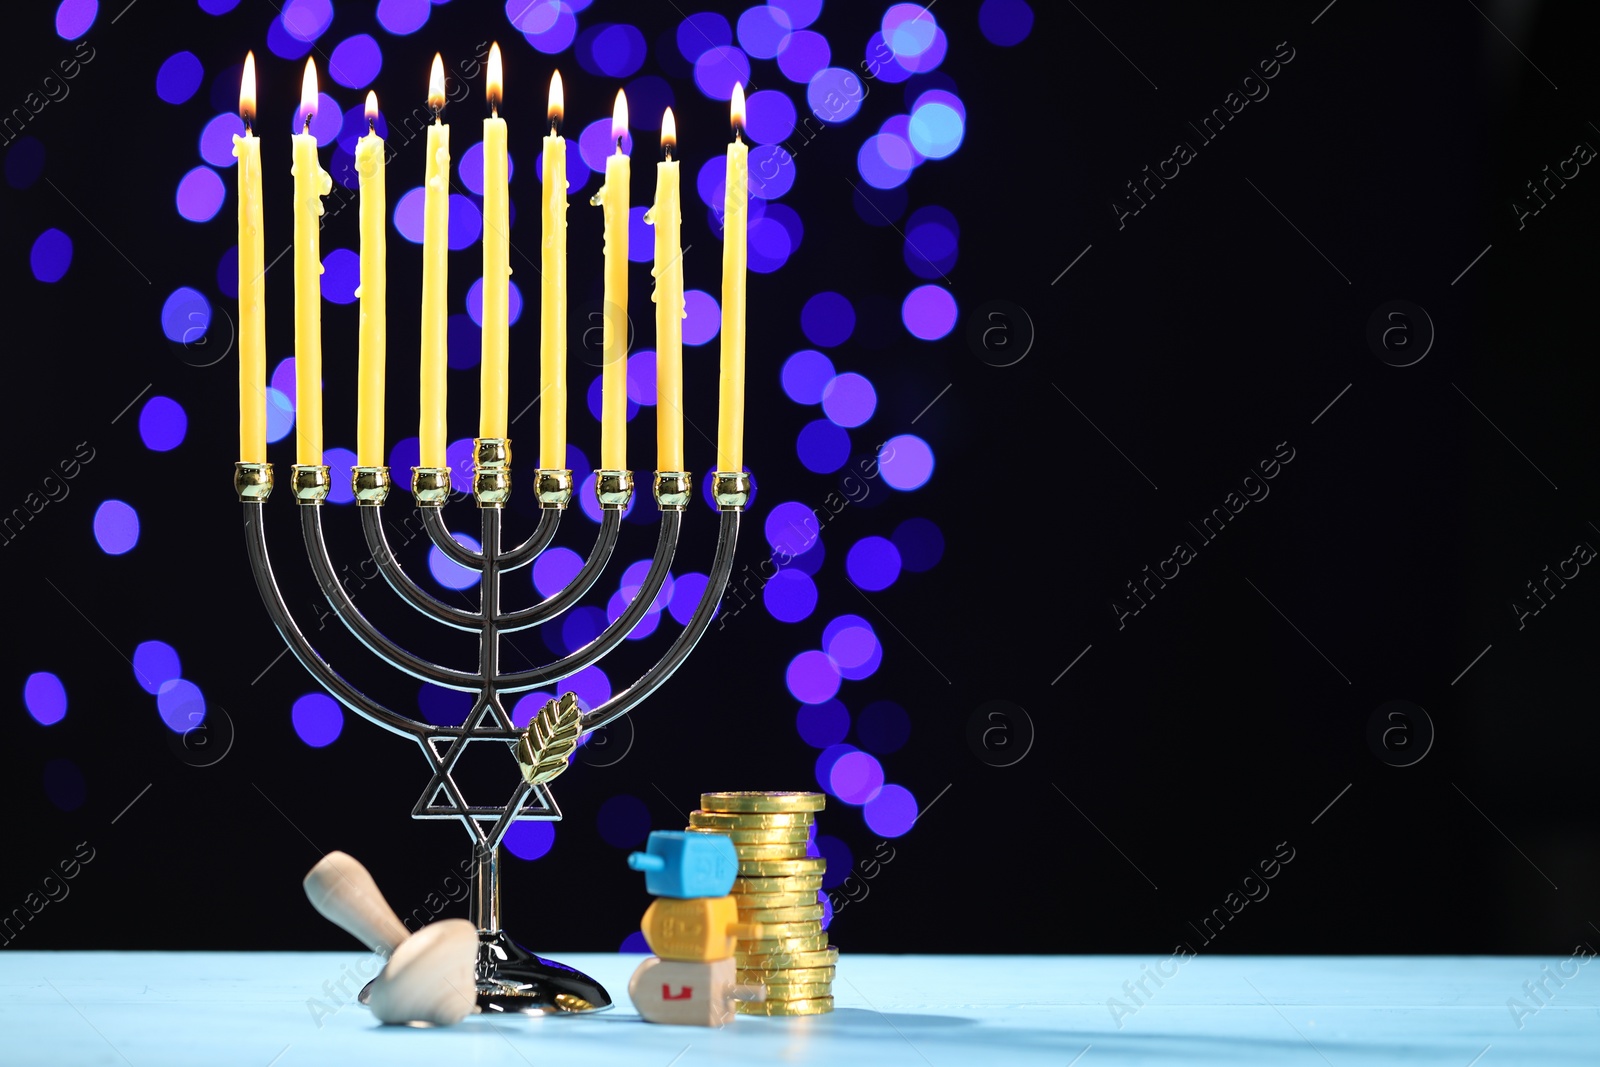 Photo of Hanukkah celebration. Menorah with burning candles, dreidels and golden coins on light blue table against blurred lights, space for text